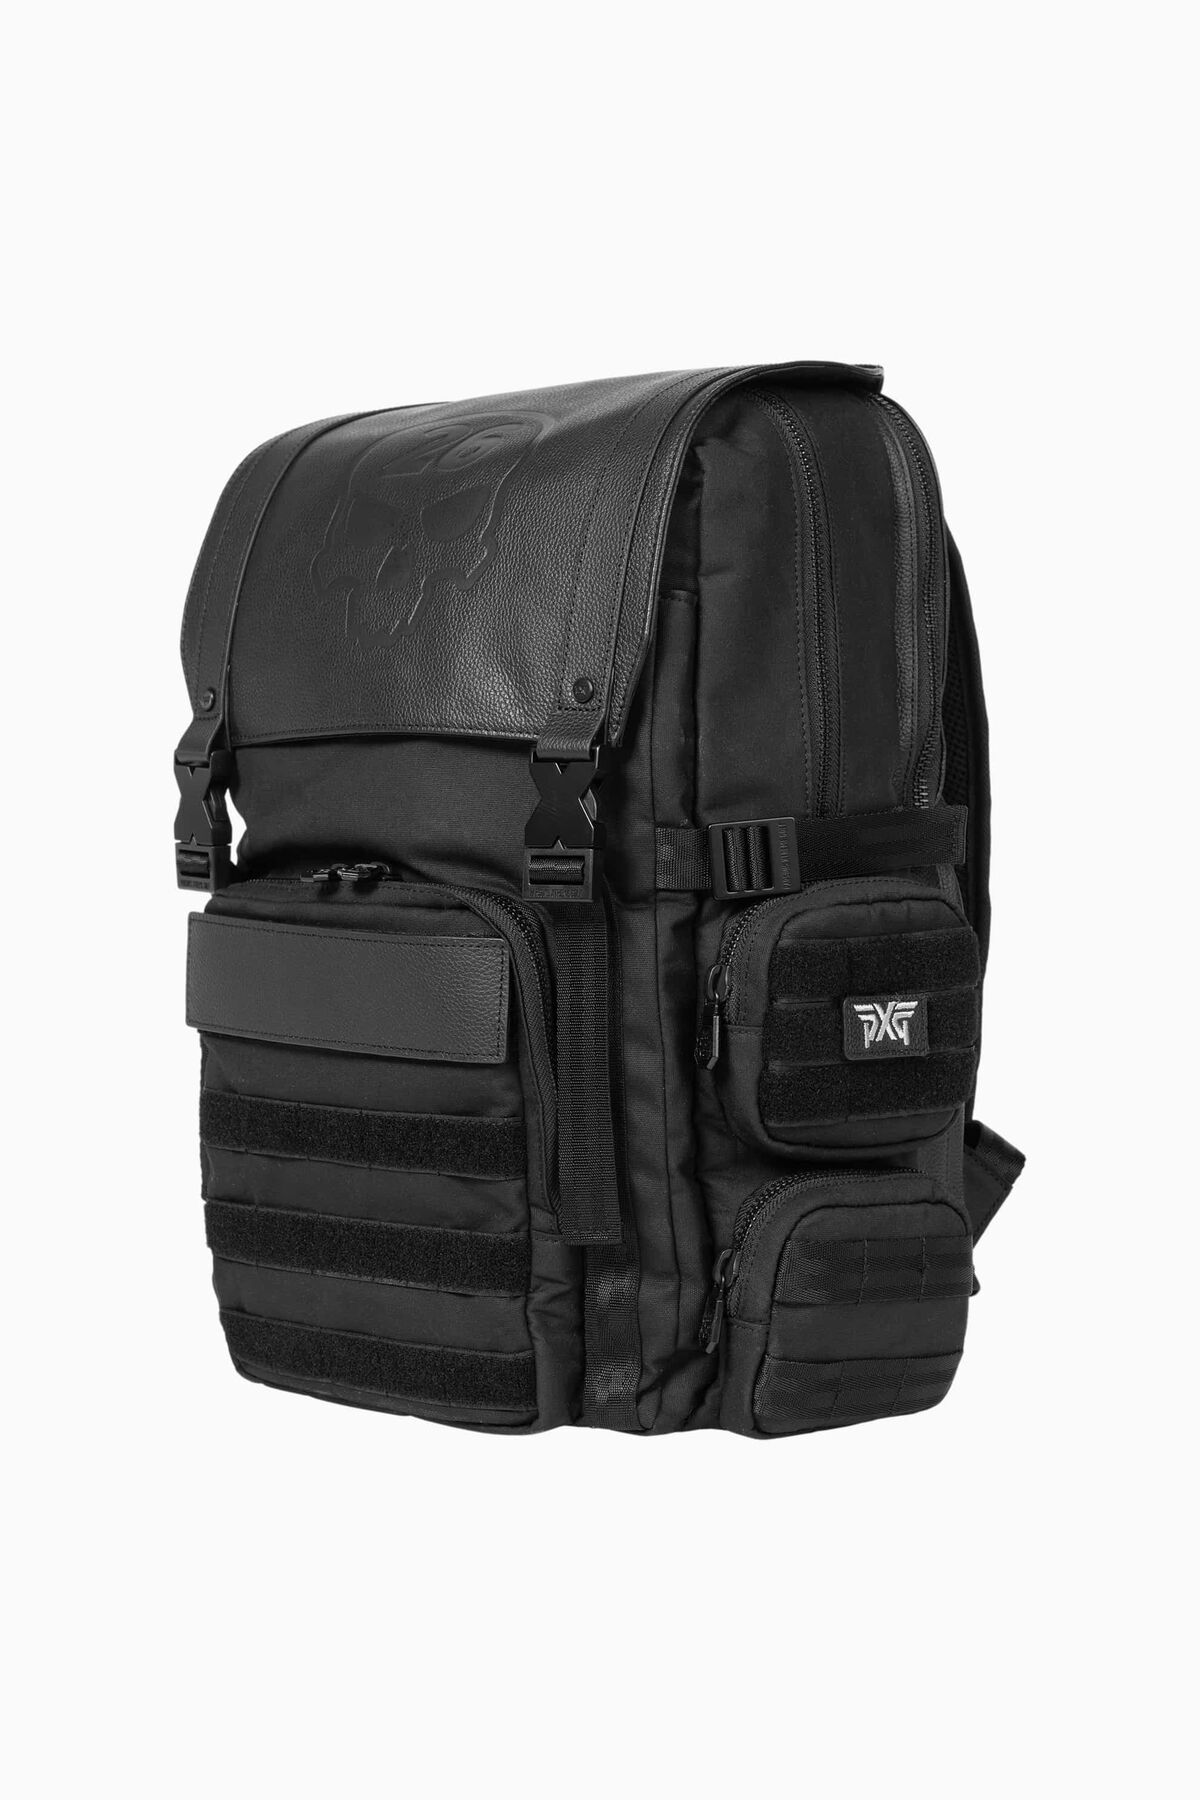 PXG Darkness Troops Backpack 